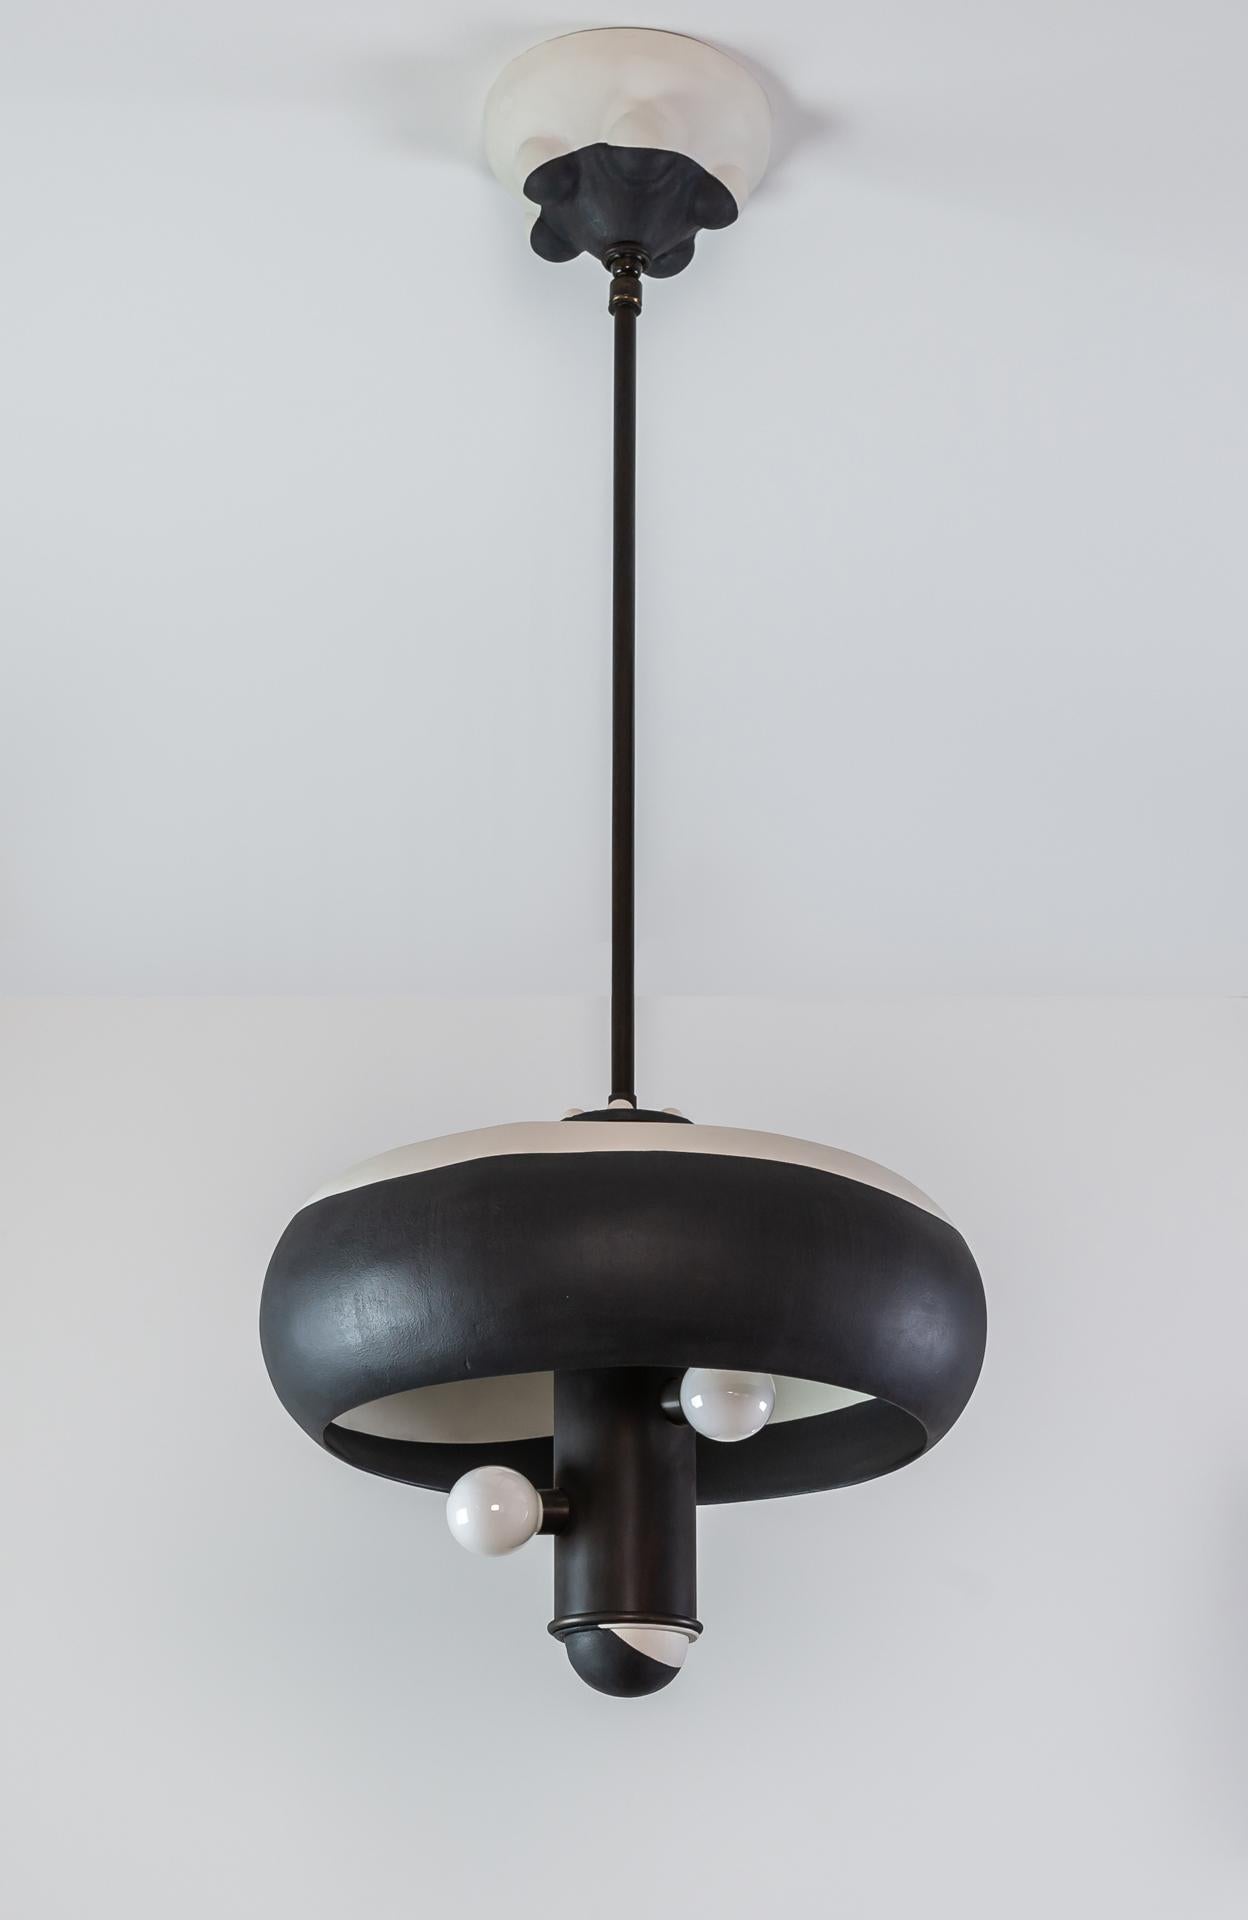 Kevin is a pendant light, part of the Posse collection; a system designed around the core ideas of collaboration and play.



The pendant is created to give the customer freedom in tailoring their own expression. The design is centered around a